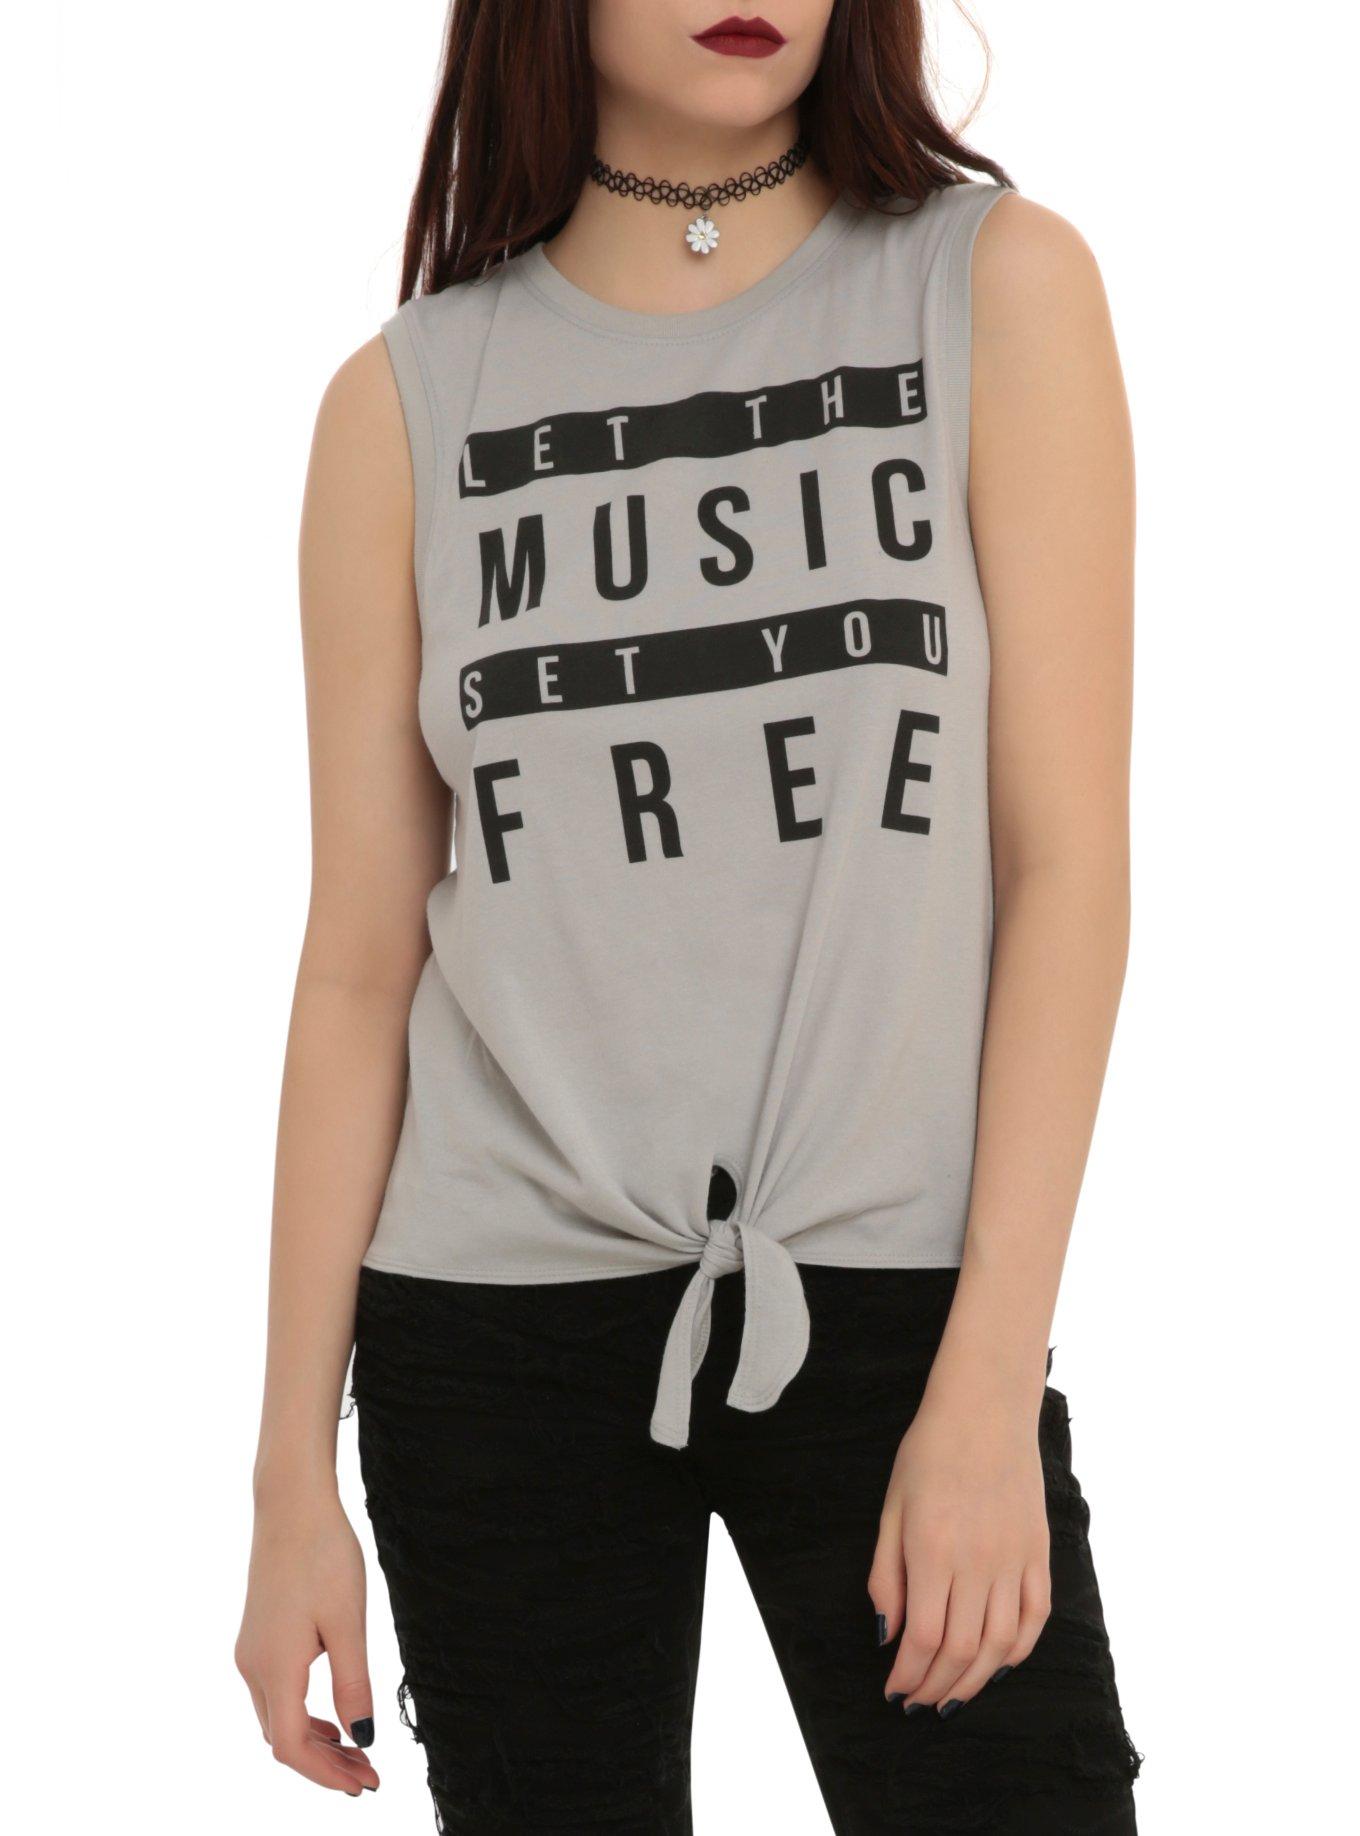 Music Set You Free Tie Front Girls Muscle Top | Hot Topic